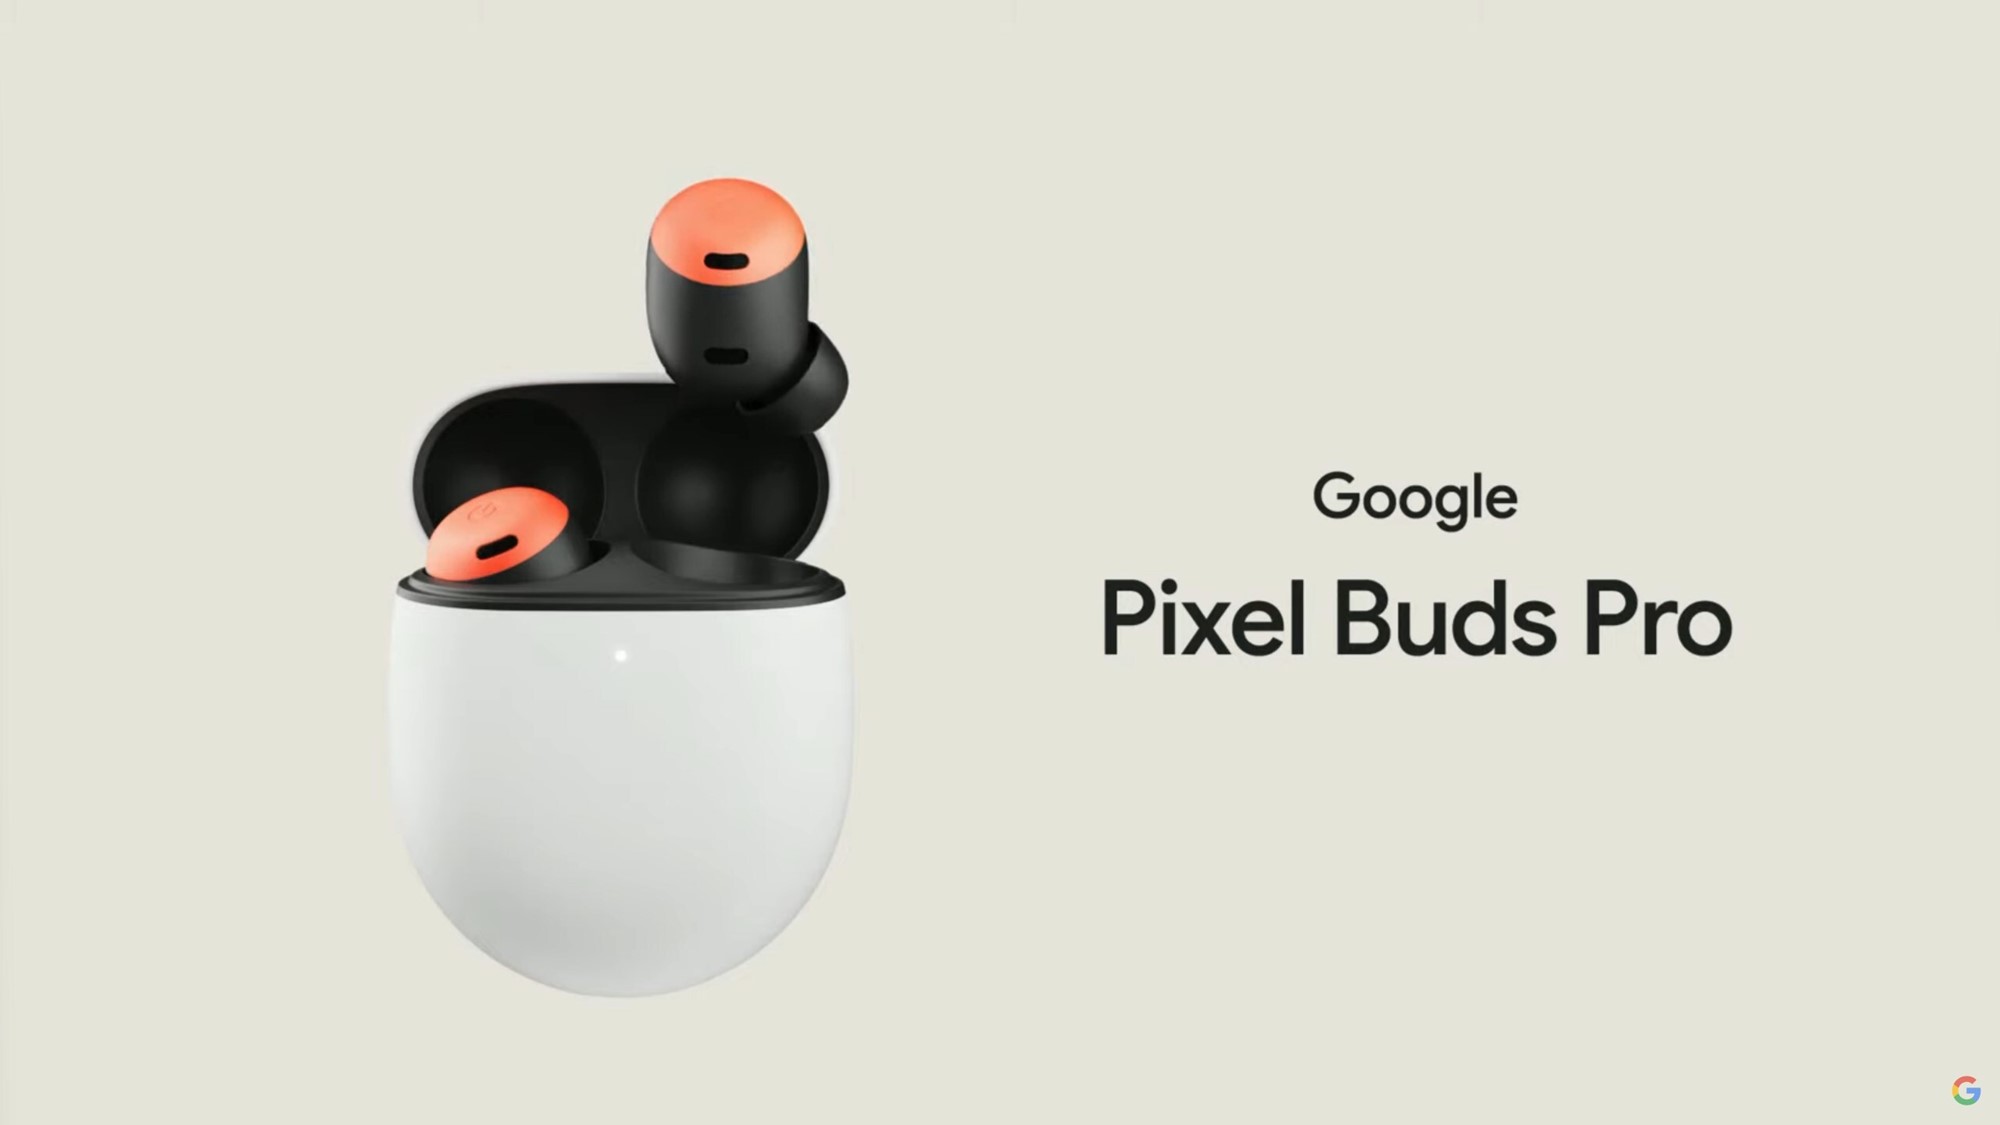 Google Pixel Buds Pro finally gets Spatial Audio support with Head Tracking